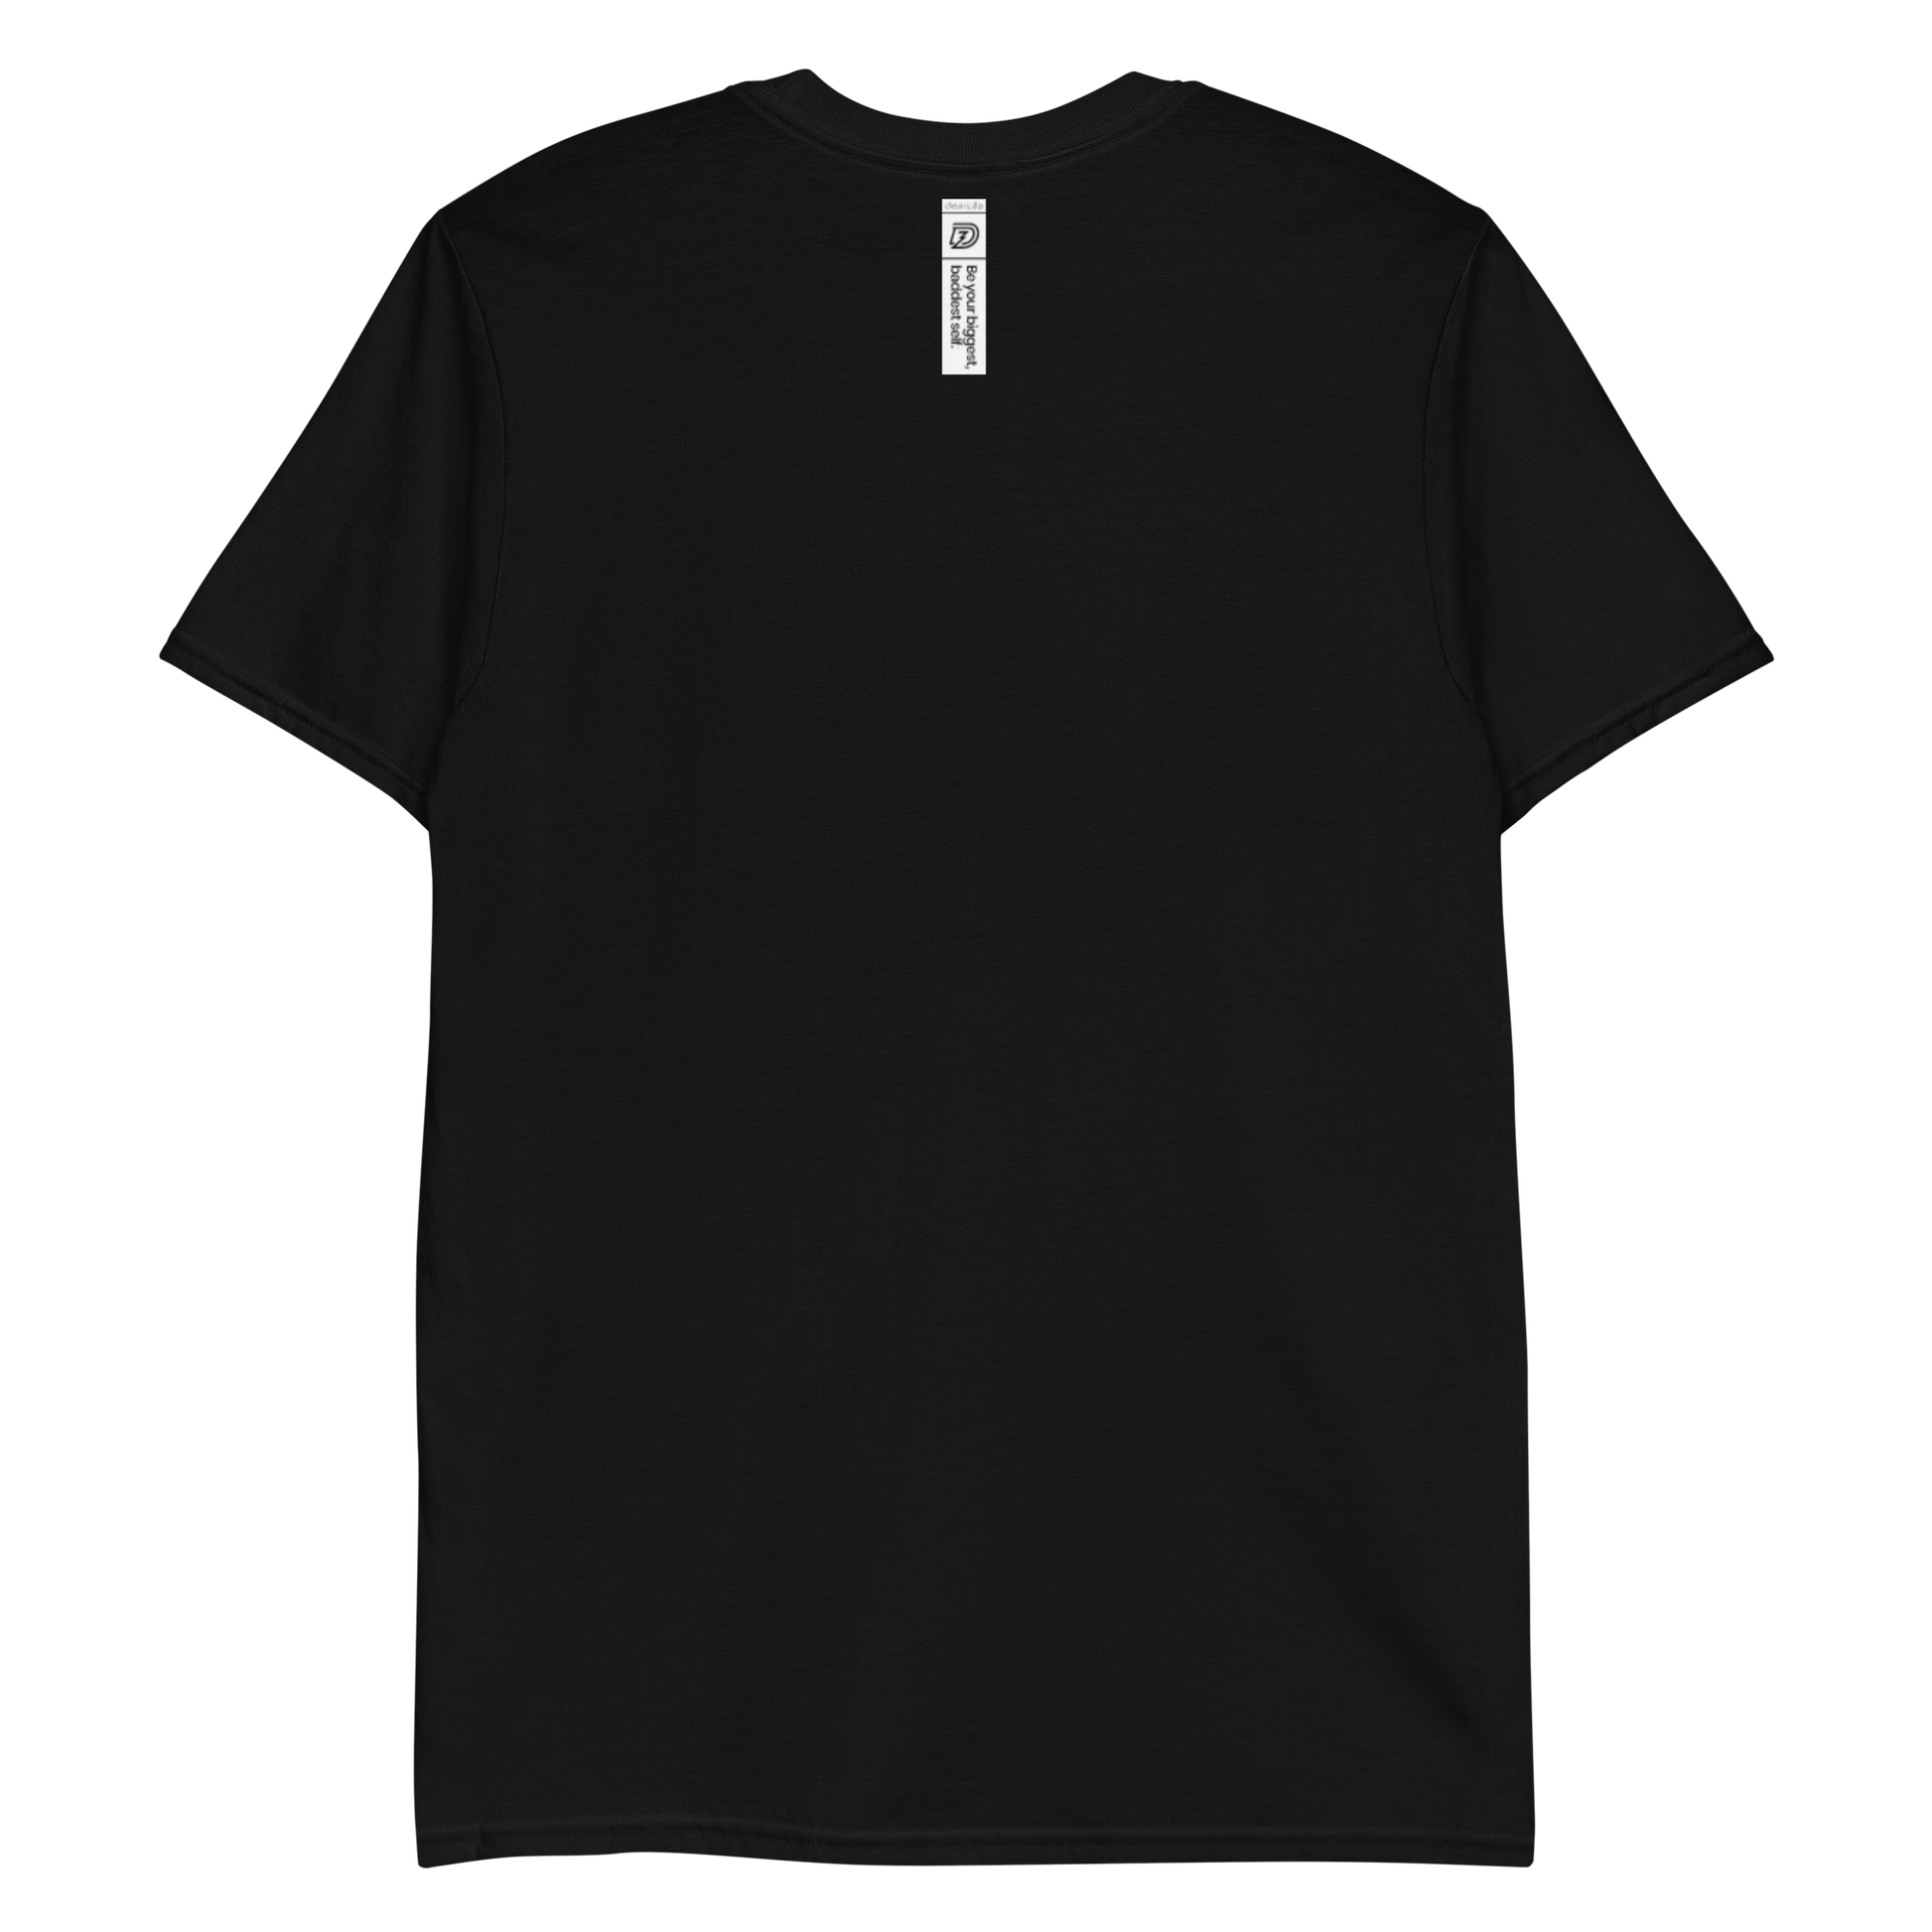 Back of DZ Monochrome Embroidered Unisex Short Sleeve Tee in Black